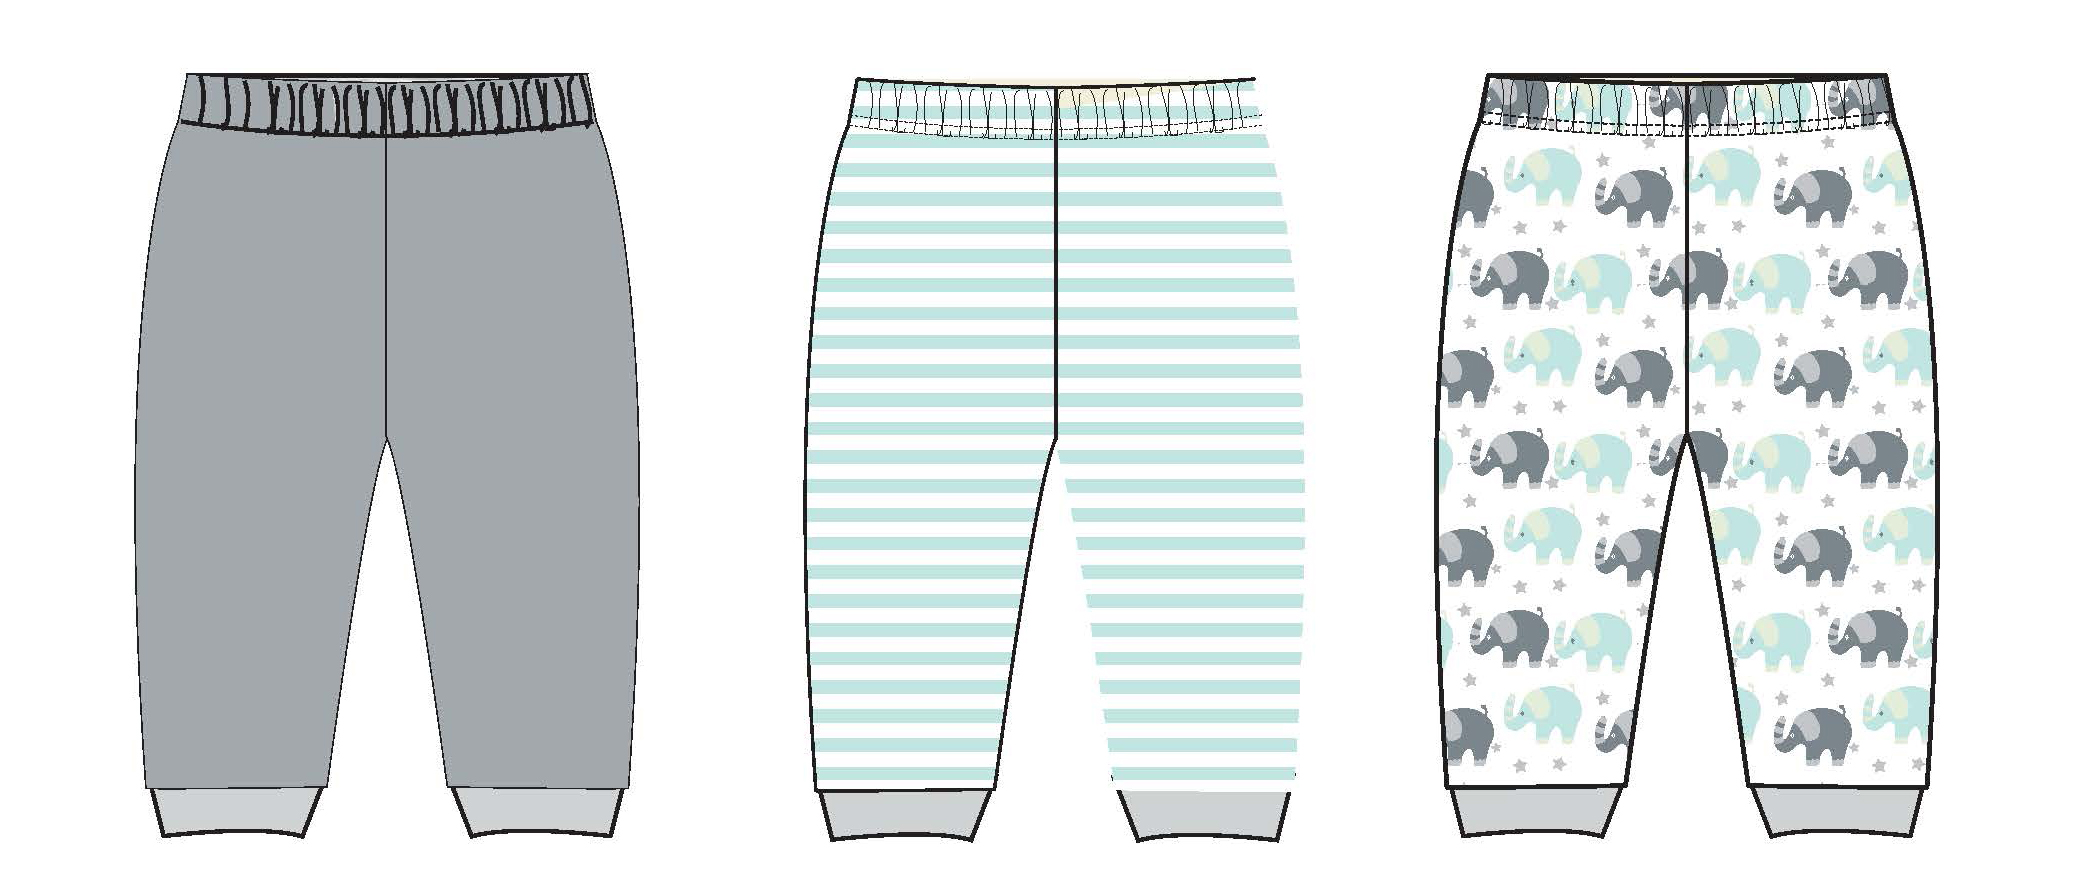 ''Gender Neutral Baby's Printed Pull-On PANTS w/ Striped, Solid, & Elephant Print - Sizes 0/3M-9M''